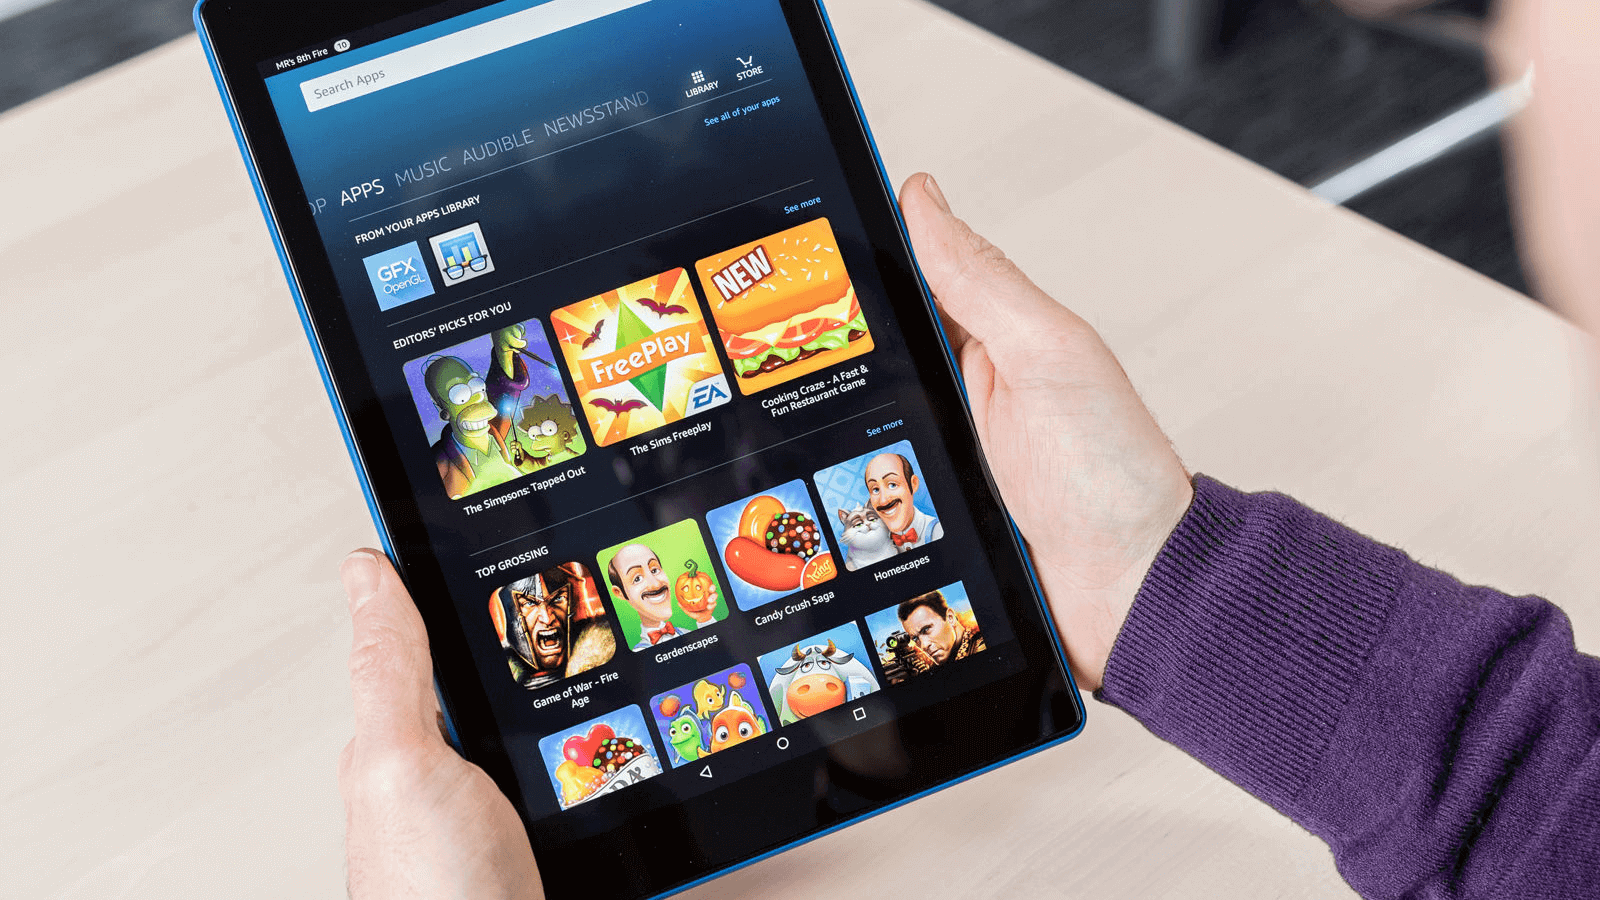 how do i access documents in kindle fire hd